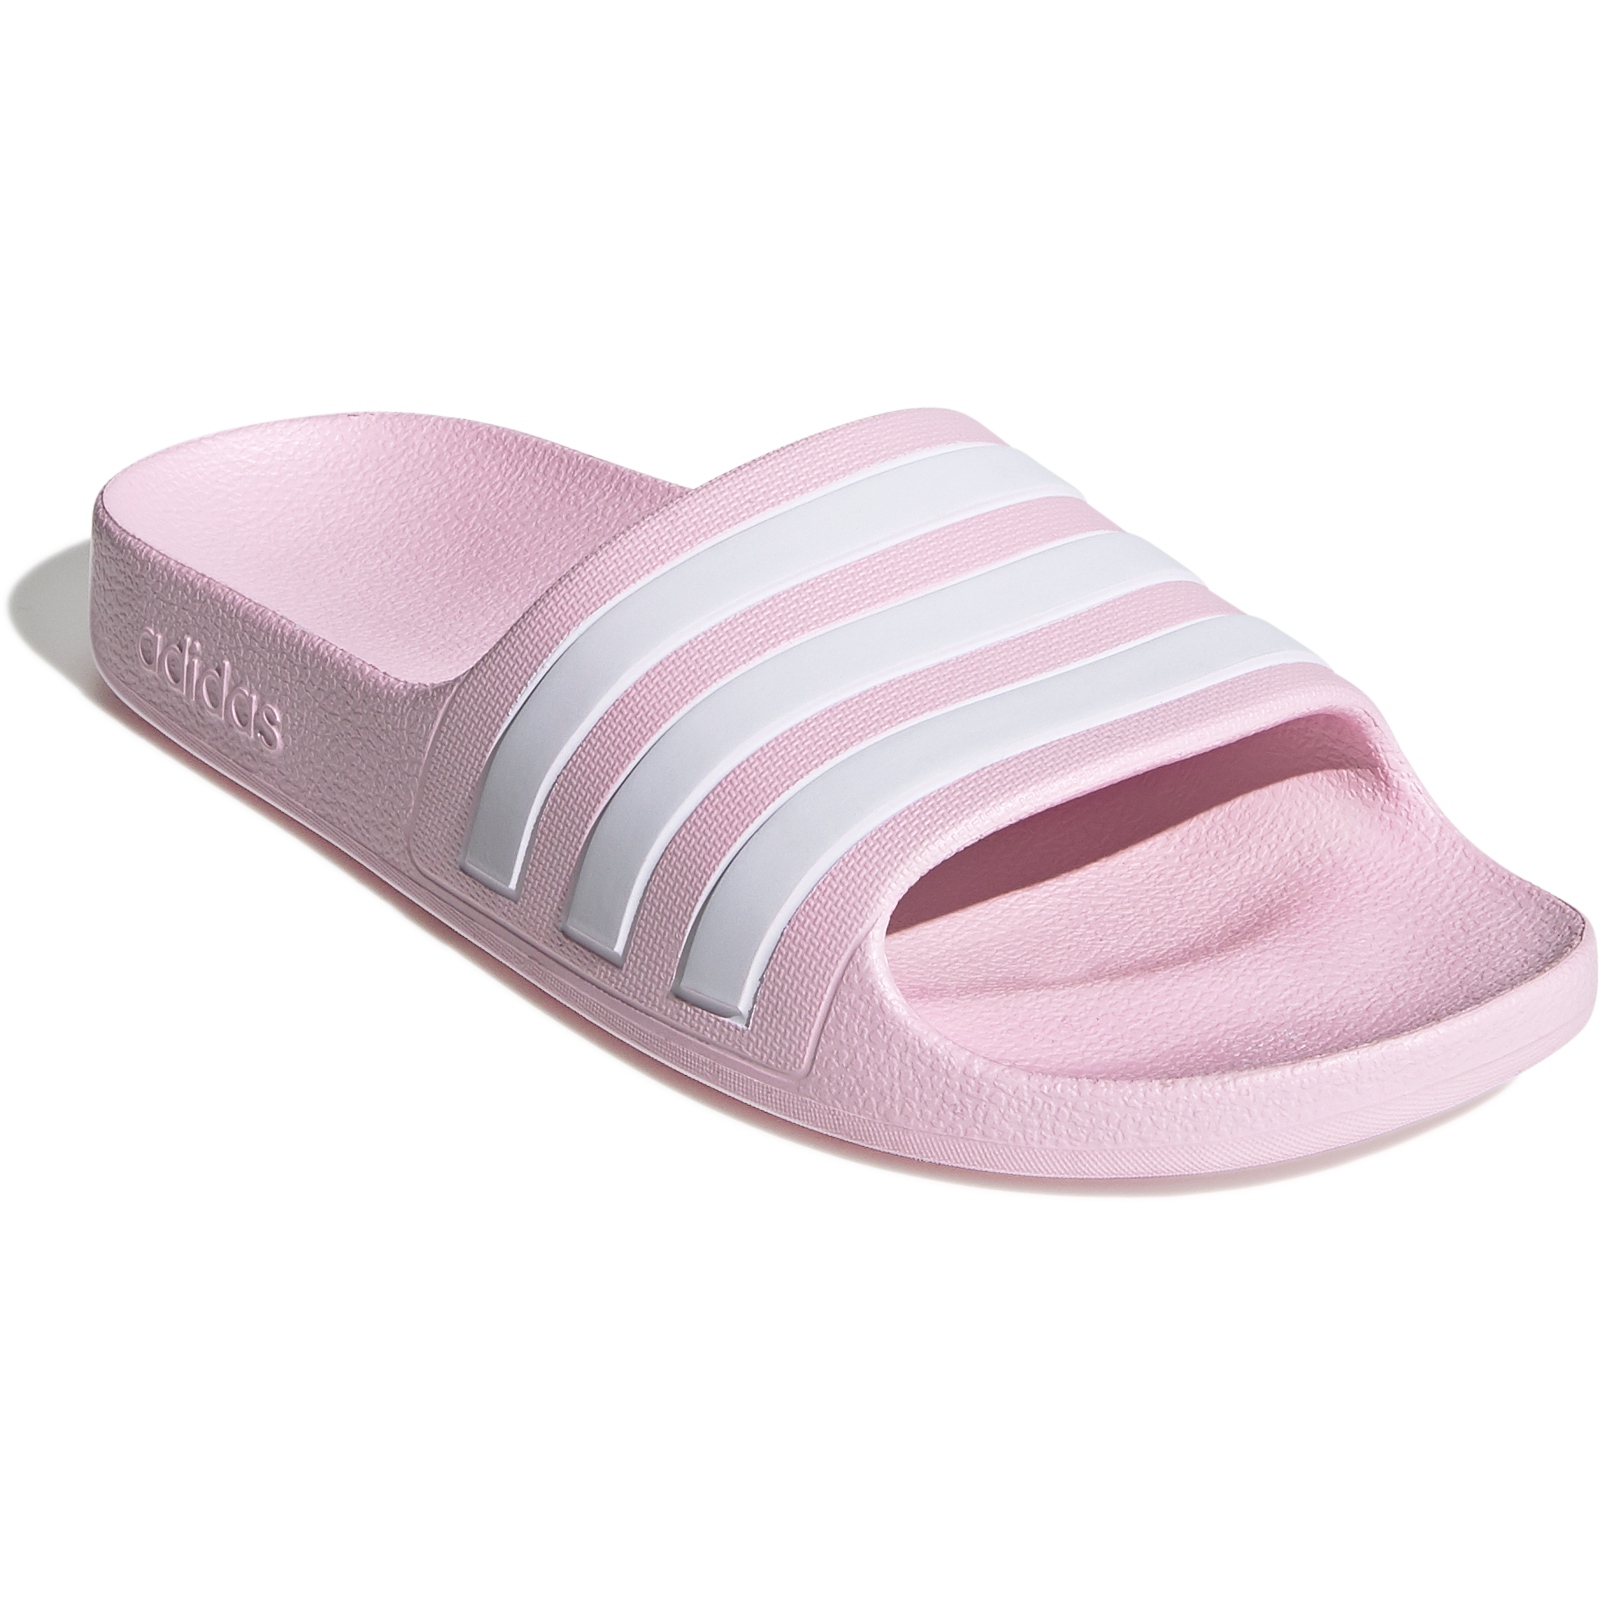 Image of adidas Adilette Aqua Slides Kids - clear pink/white/clear pink FY8072